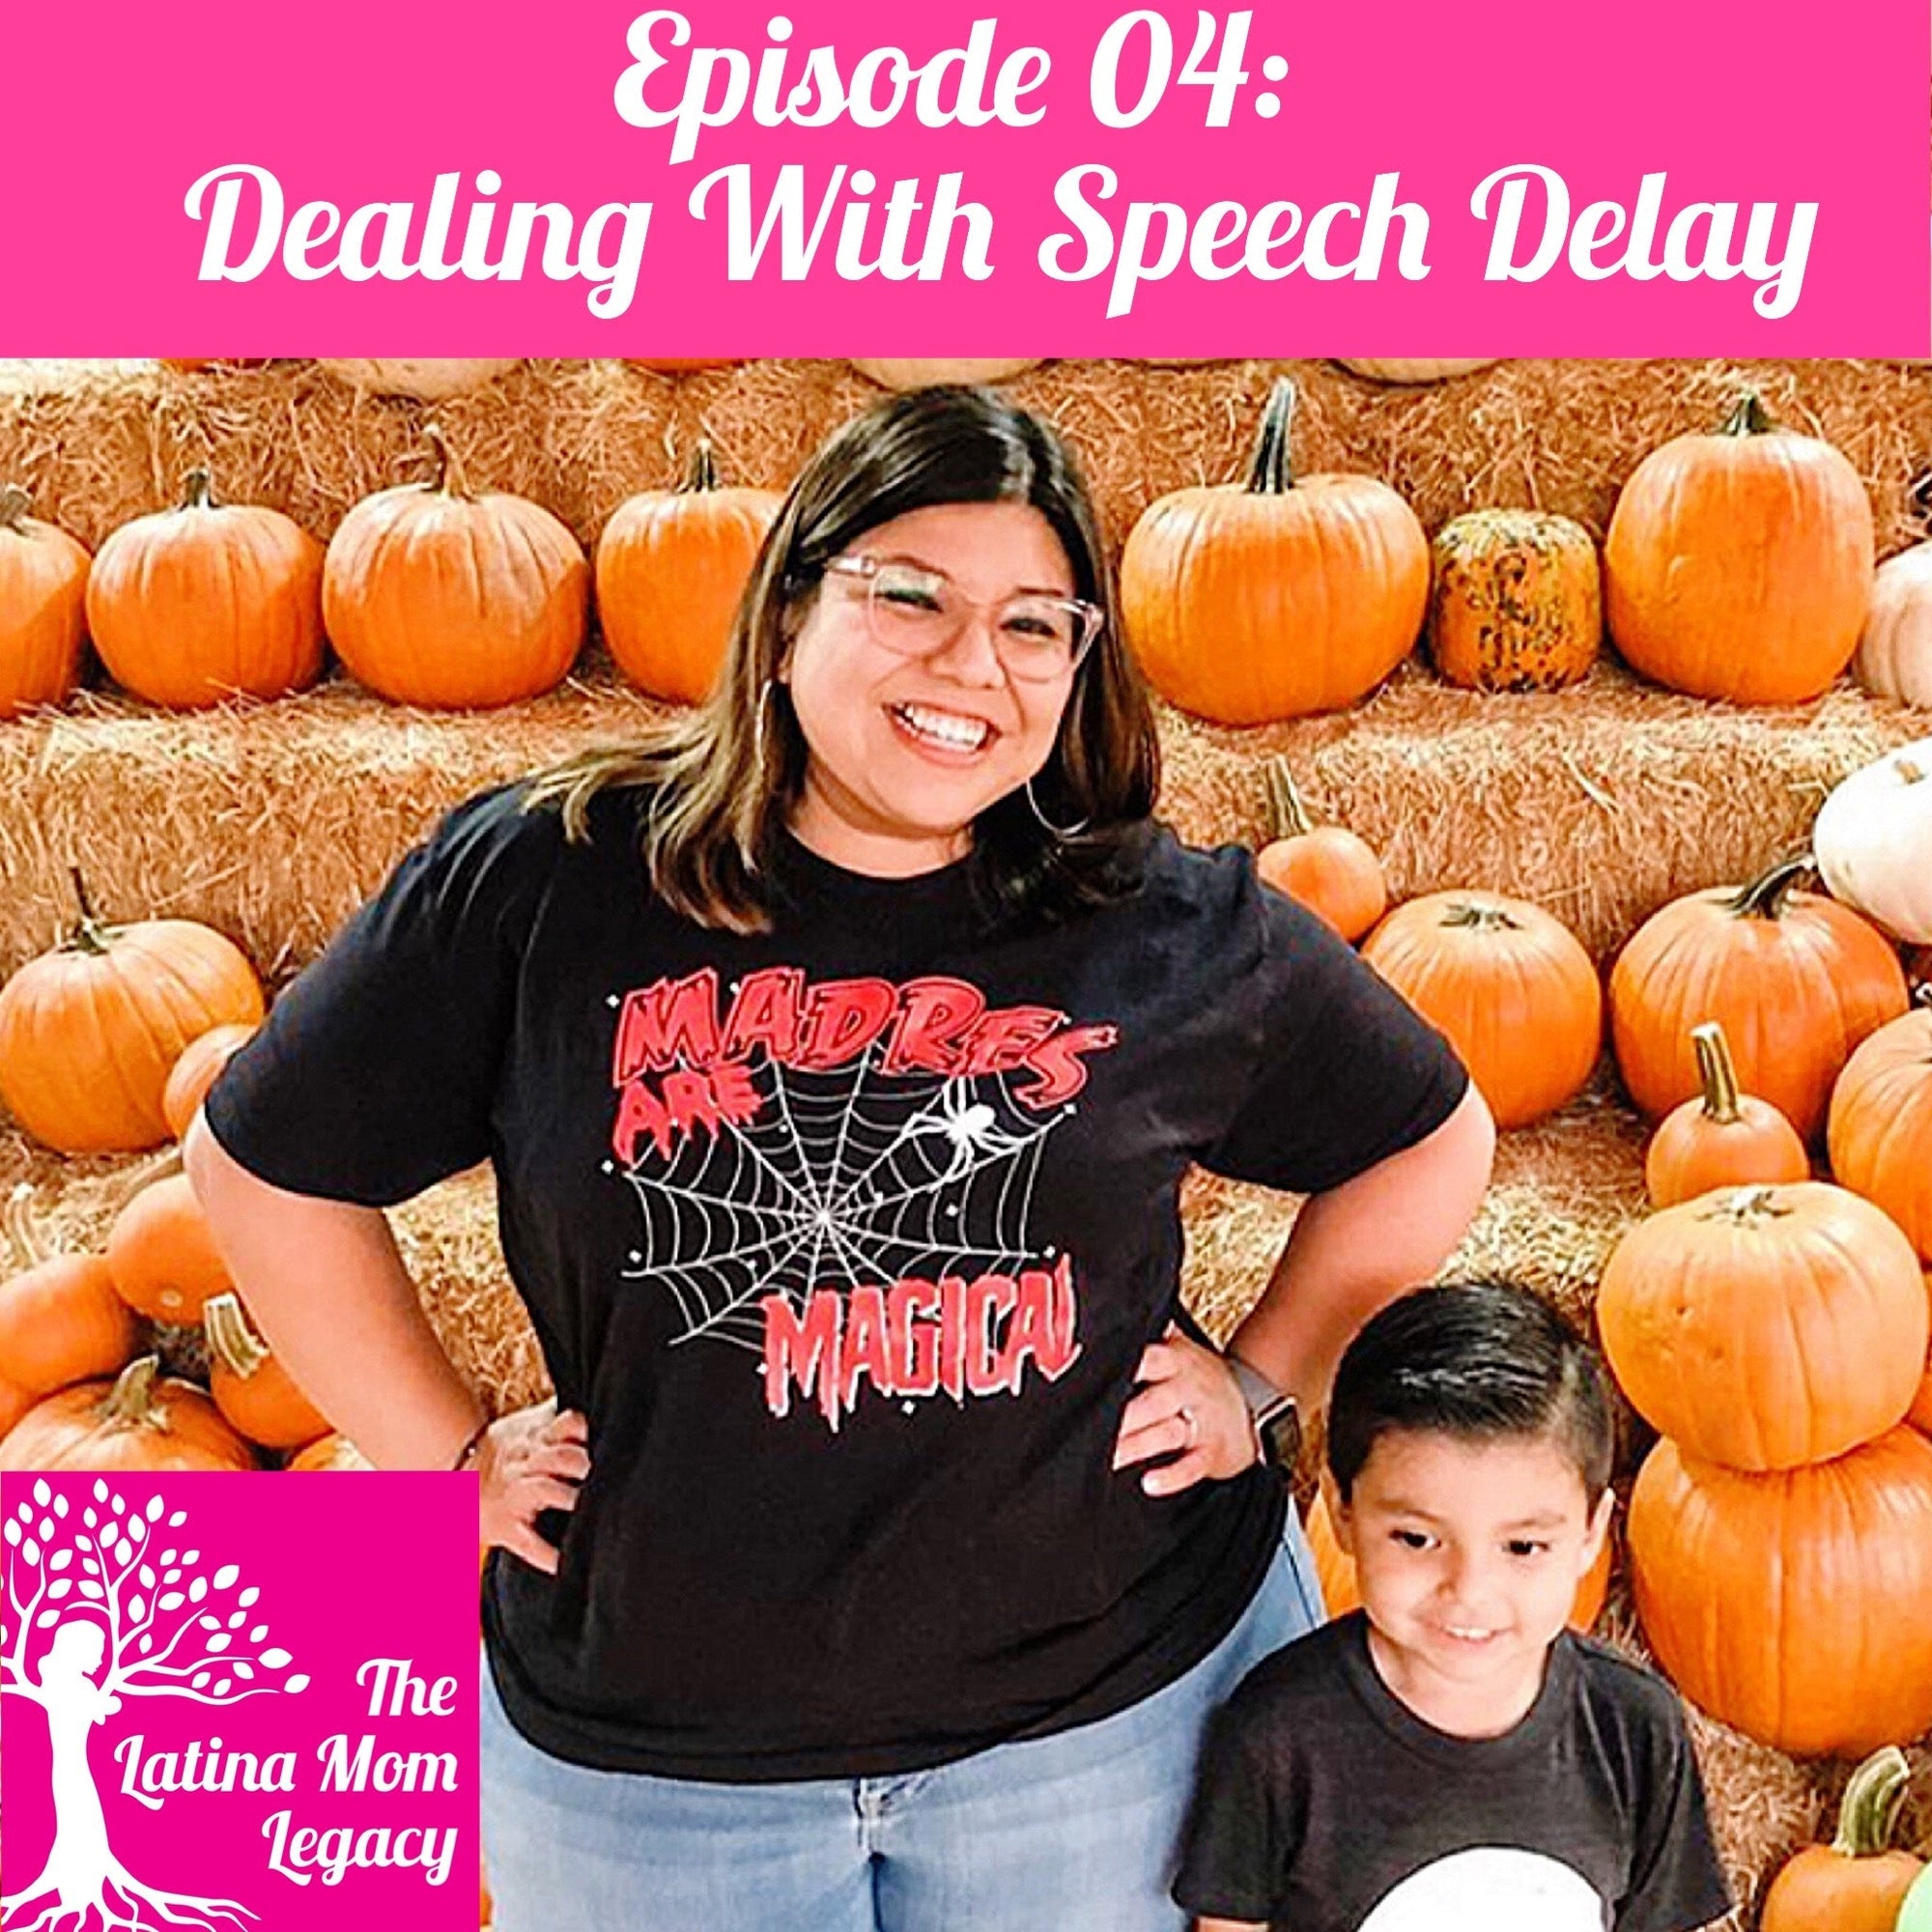 Episode 04 - The Latina Mom Legacy: Dealing with speech delay with Analily Morales - Mi LegaSi